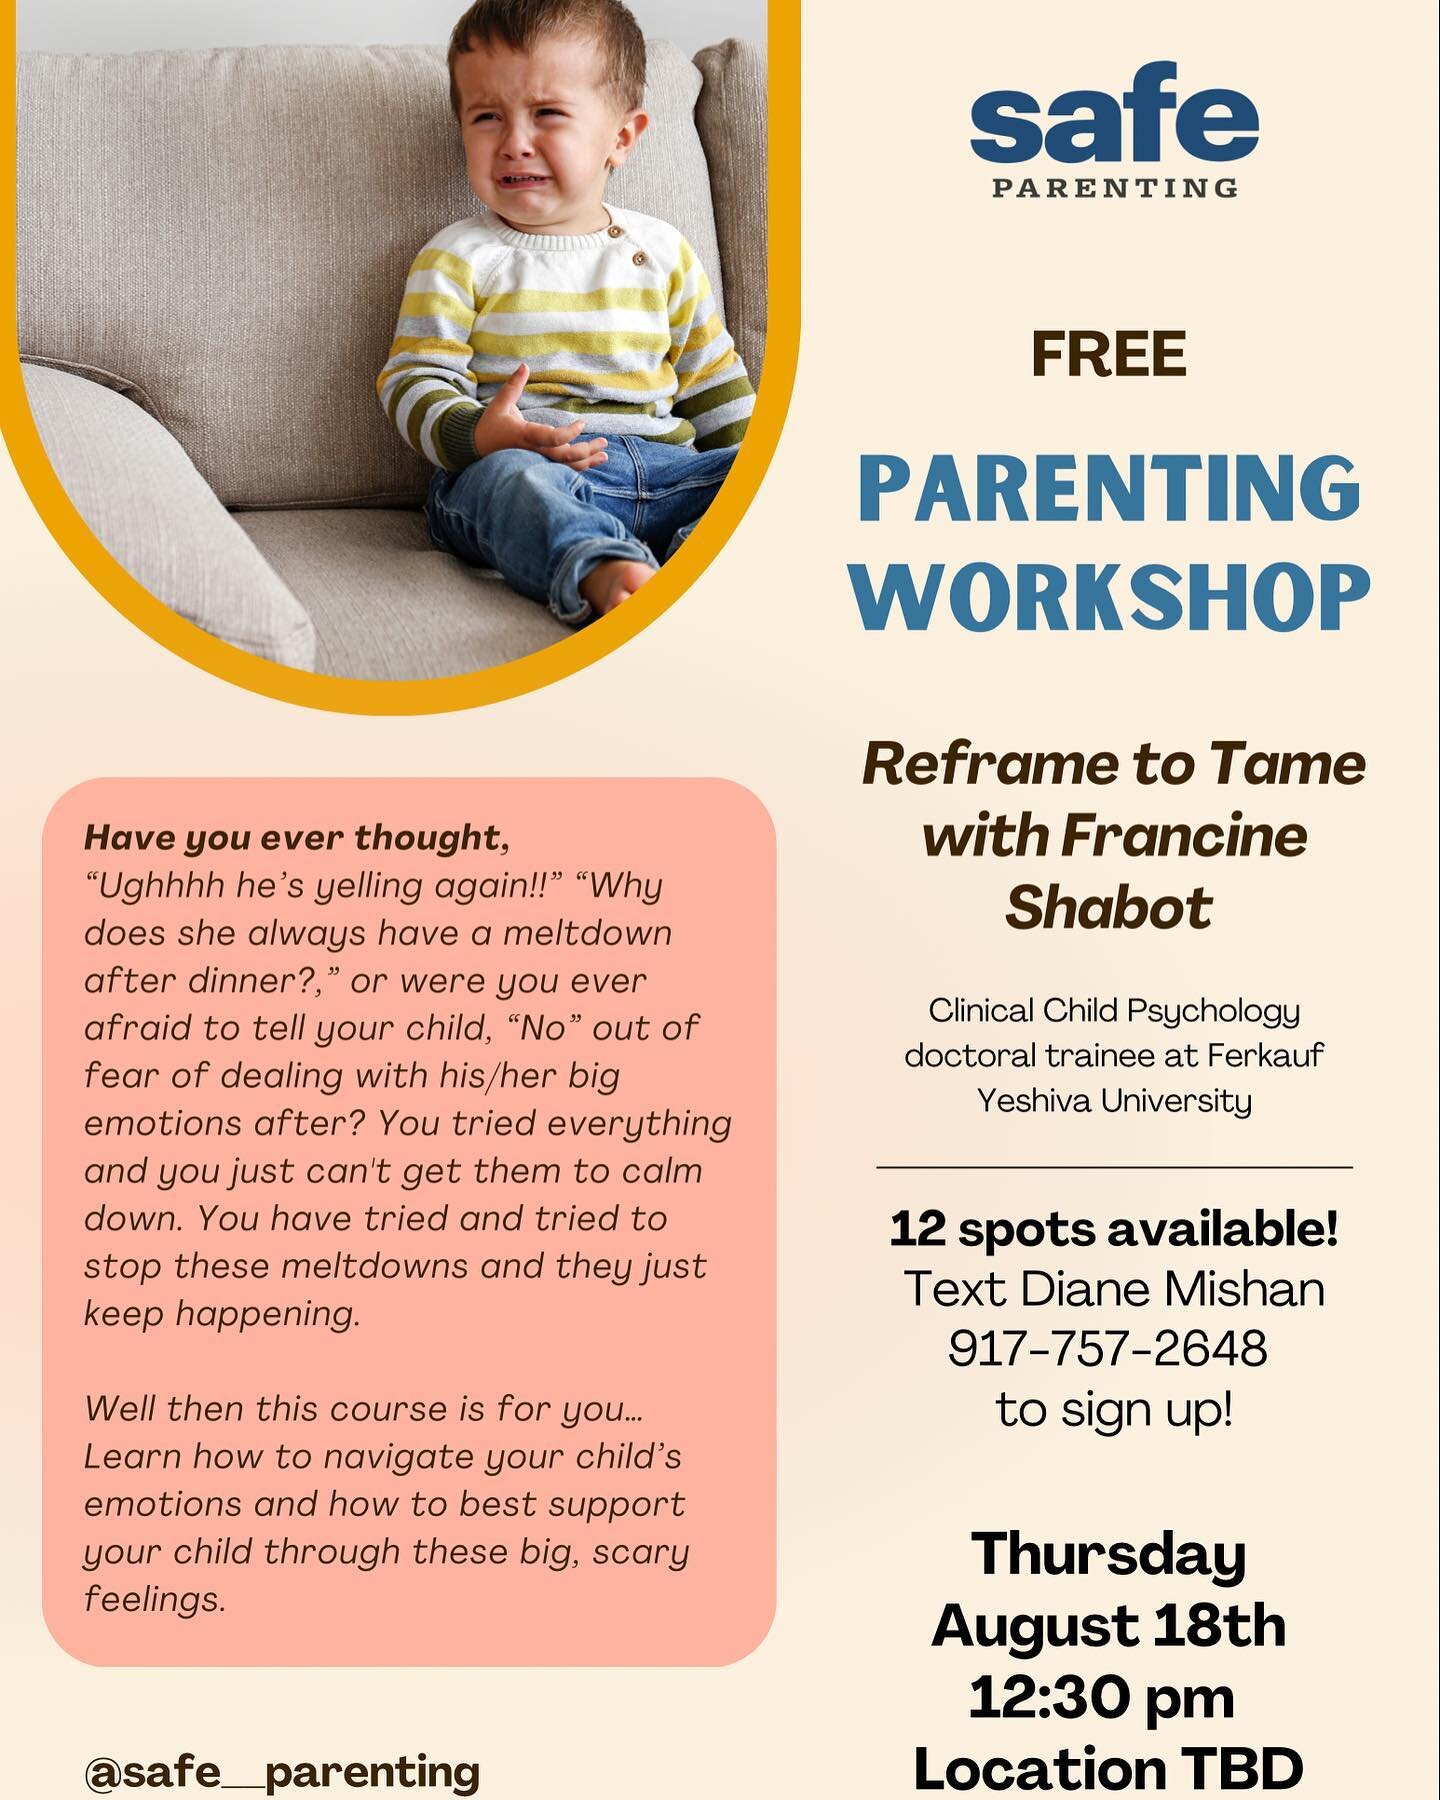 This Thursday -Sign up asap!
 Only a few spots left! 

Toddler moms or moms with young kids jump on this amazing opportunity for a free parenting workshop of advice / tips on dealing with this complex age! 

Info to sign up on flyer!